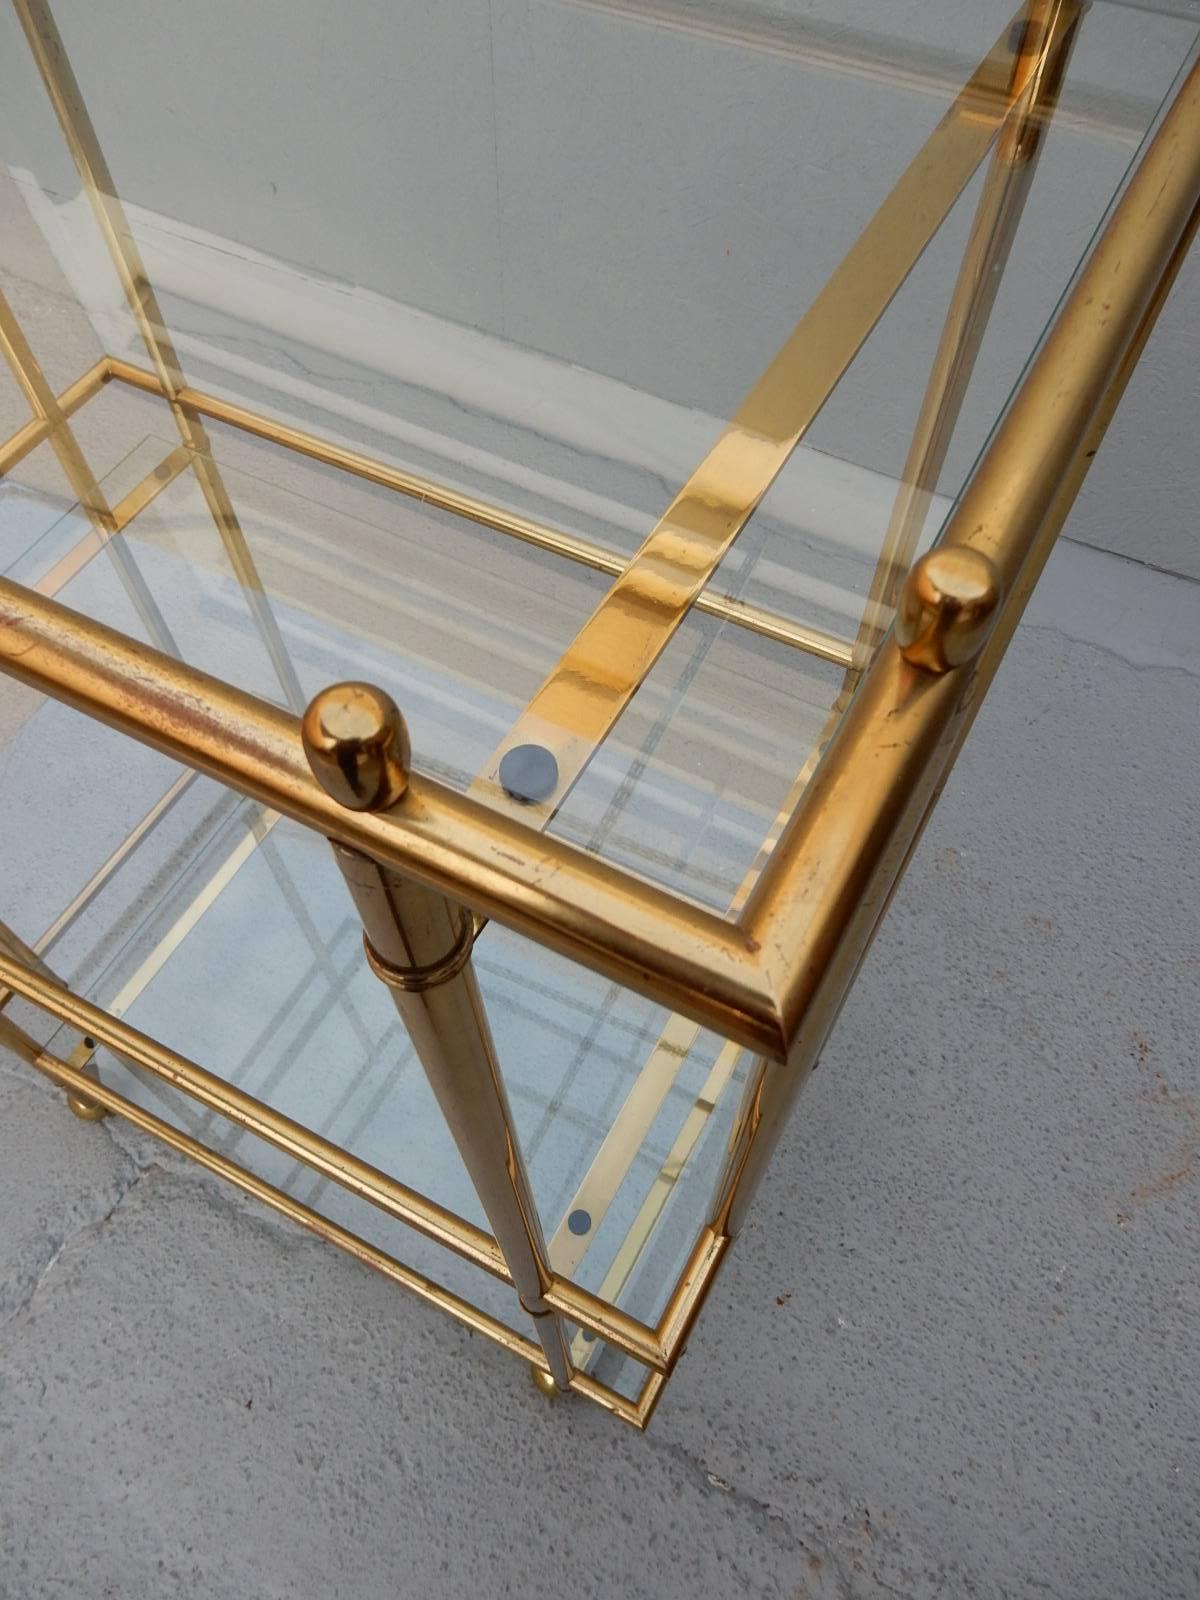 Late 20th Century Mid-Century Modern Three-Tier Brass and Glass Bar Service Cart Trolley